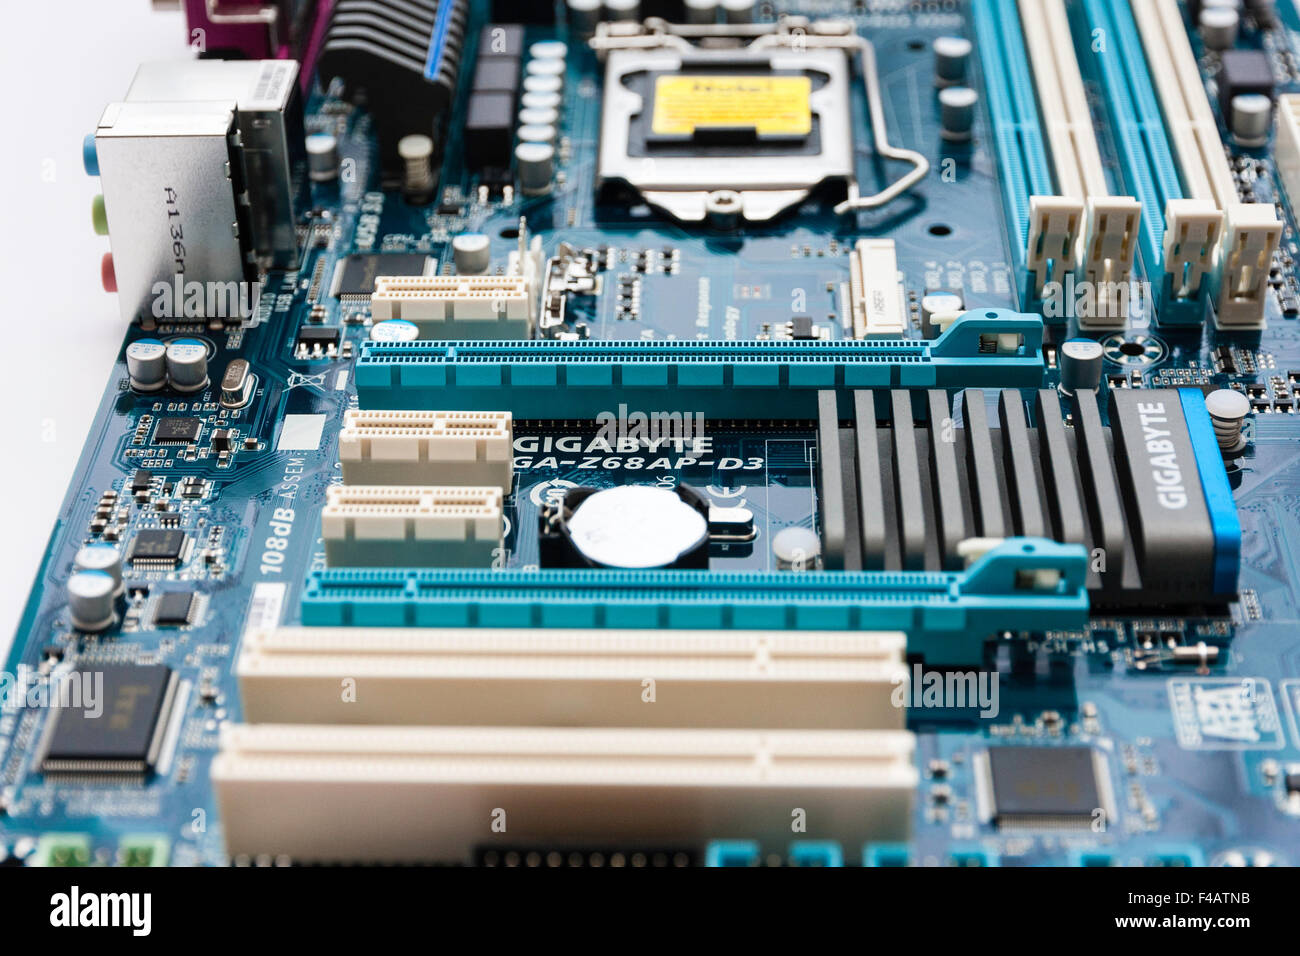 Computer motherboard showing PCI expansion slots, top of closed chip socket, Ram slots for memory and Gigabyte processor. Stock Photo